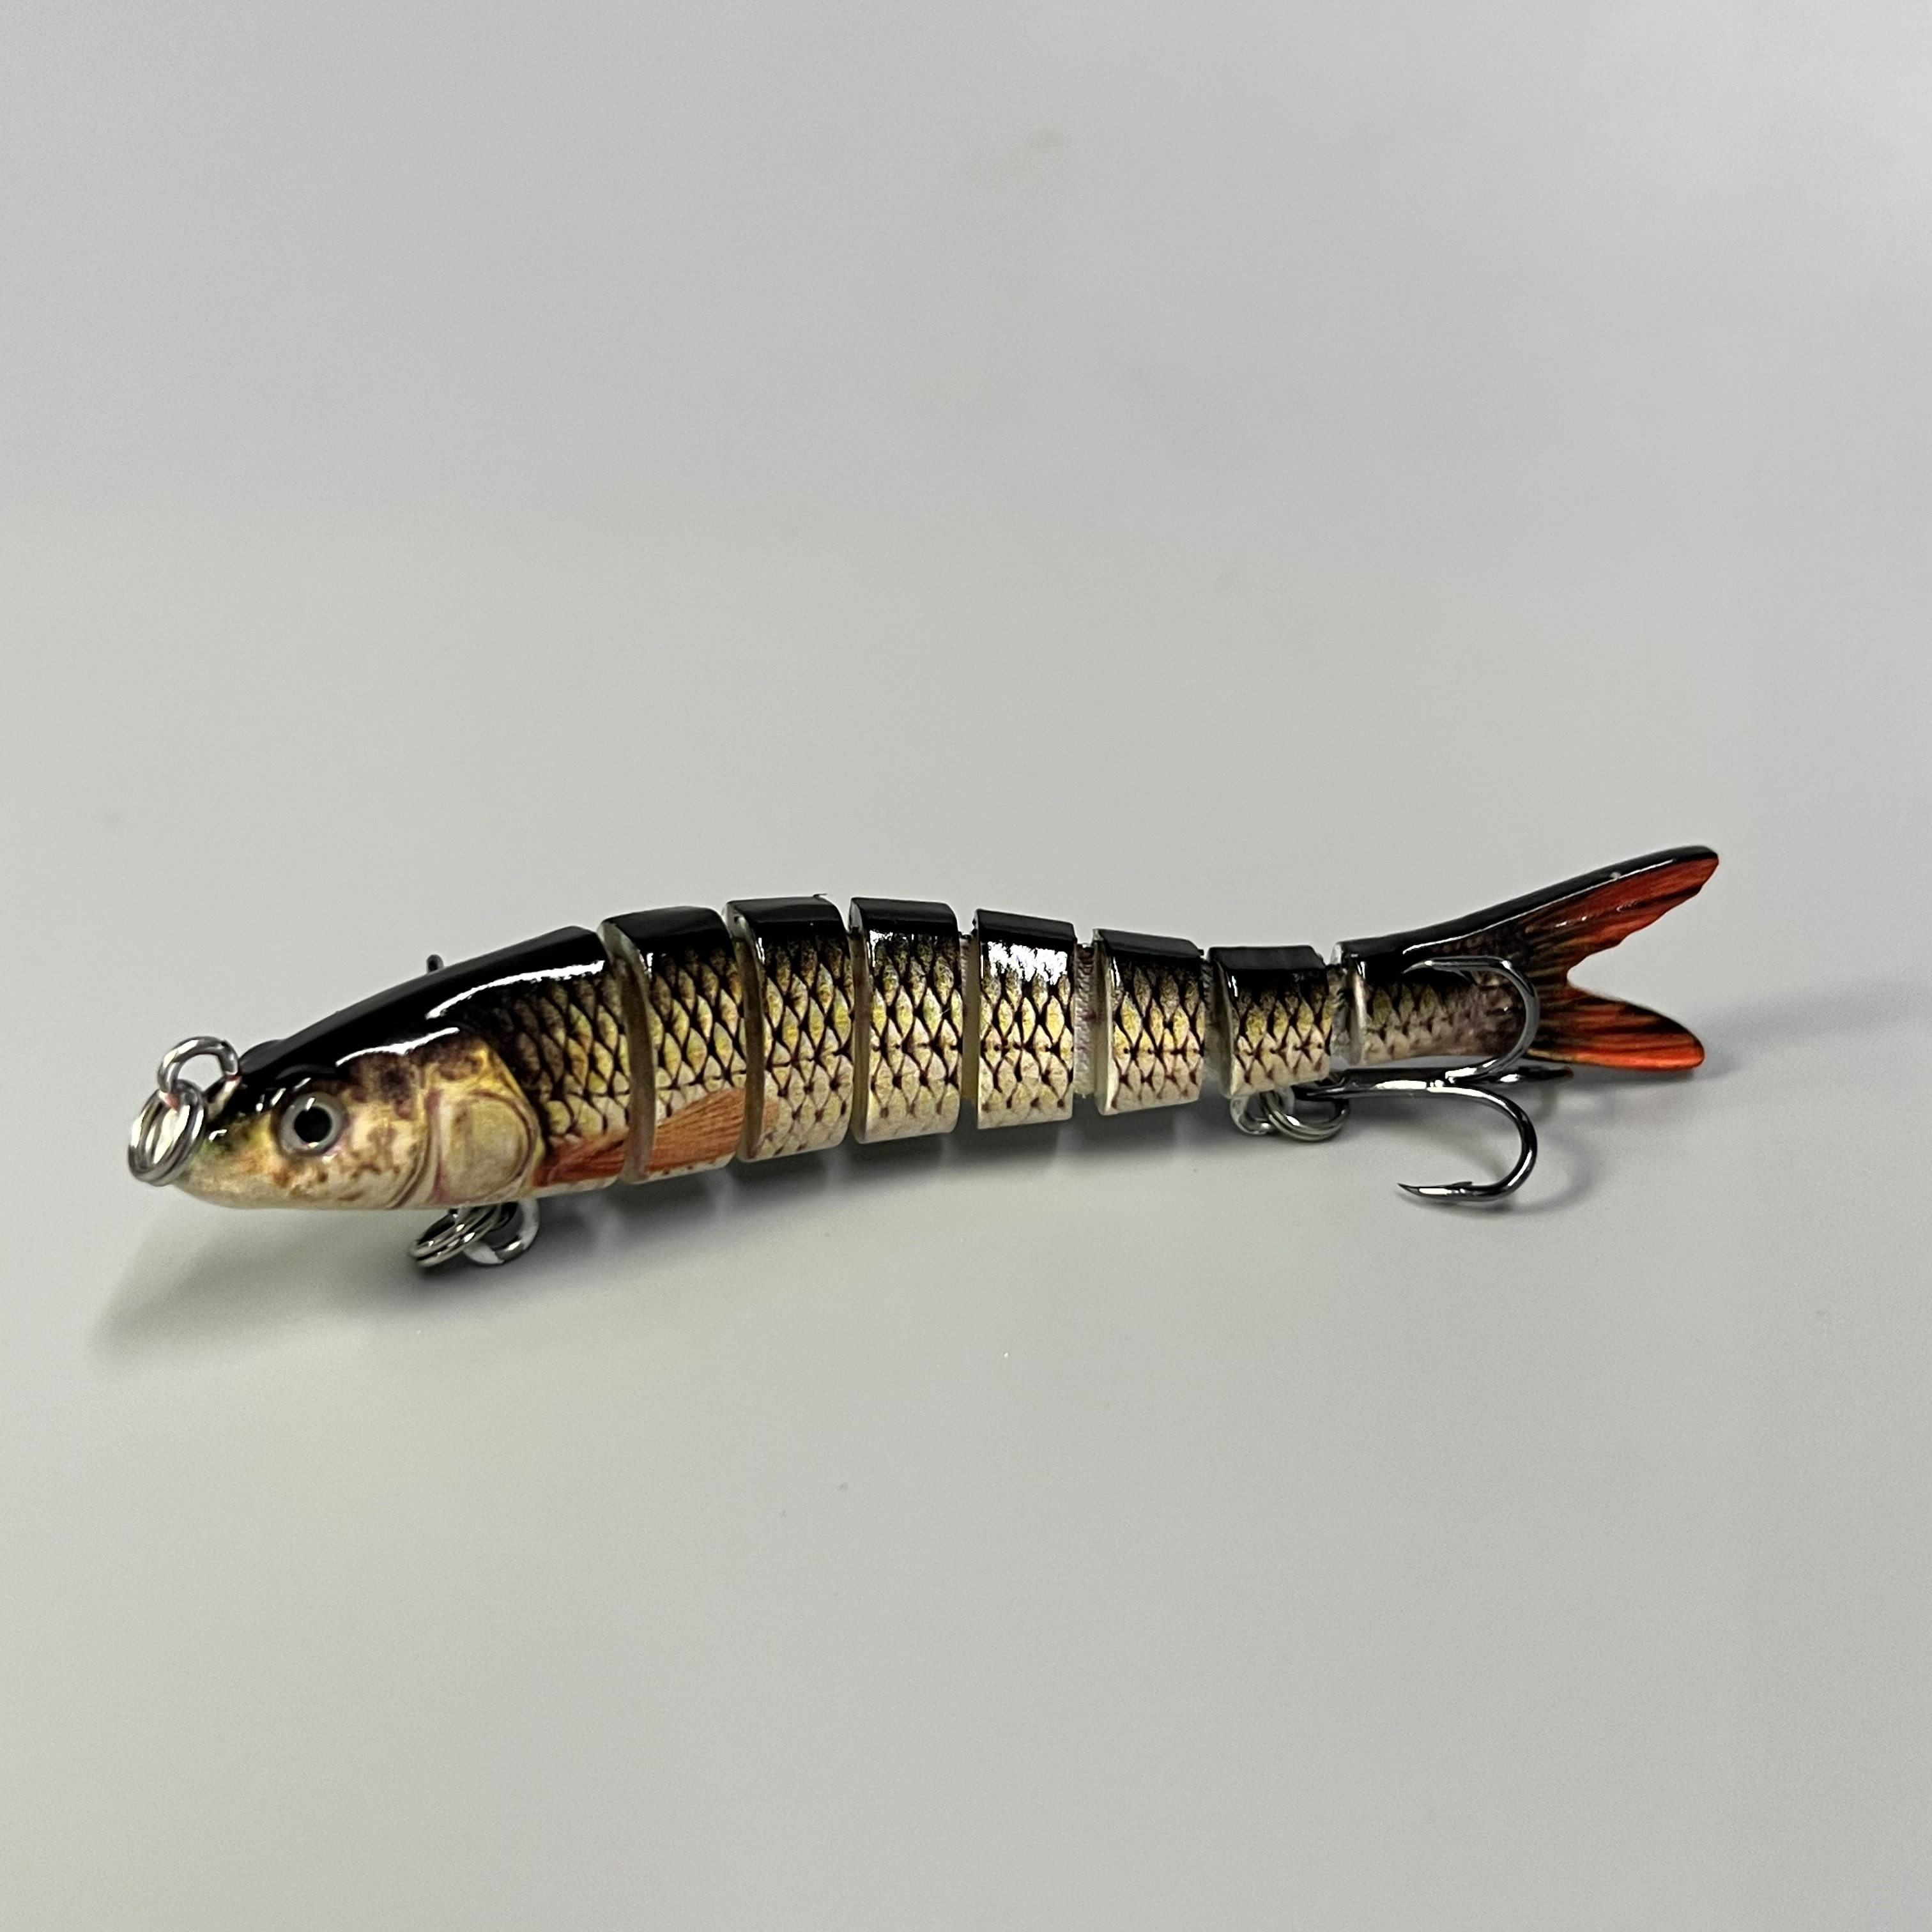 1PCS 8cm 13g Multi Jointed Swimbait Pike Jerkbaits Fishing Lures Wobblers  Artificial Bait for Sinking Minnow Lure Crankbait